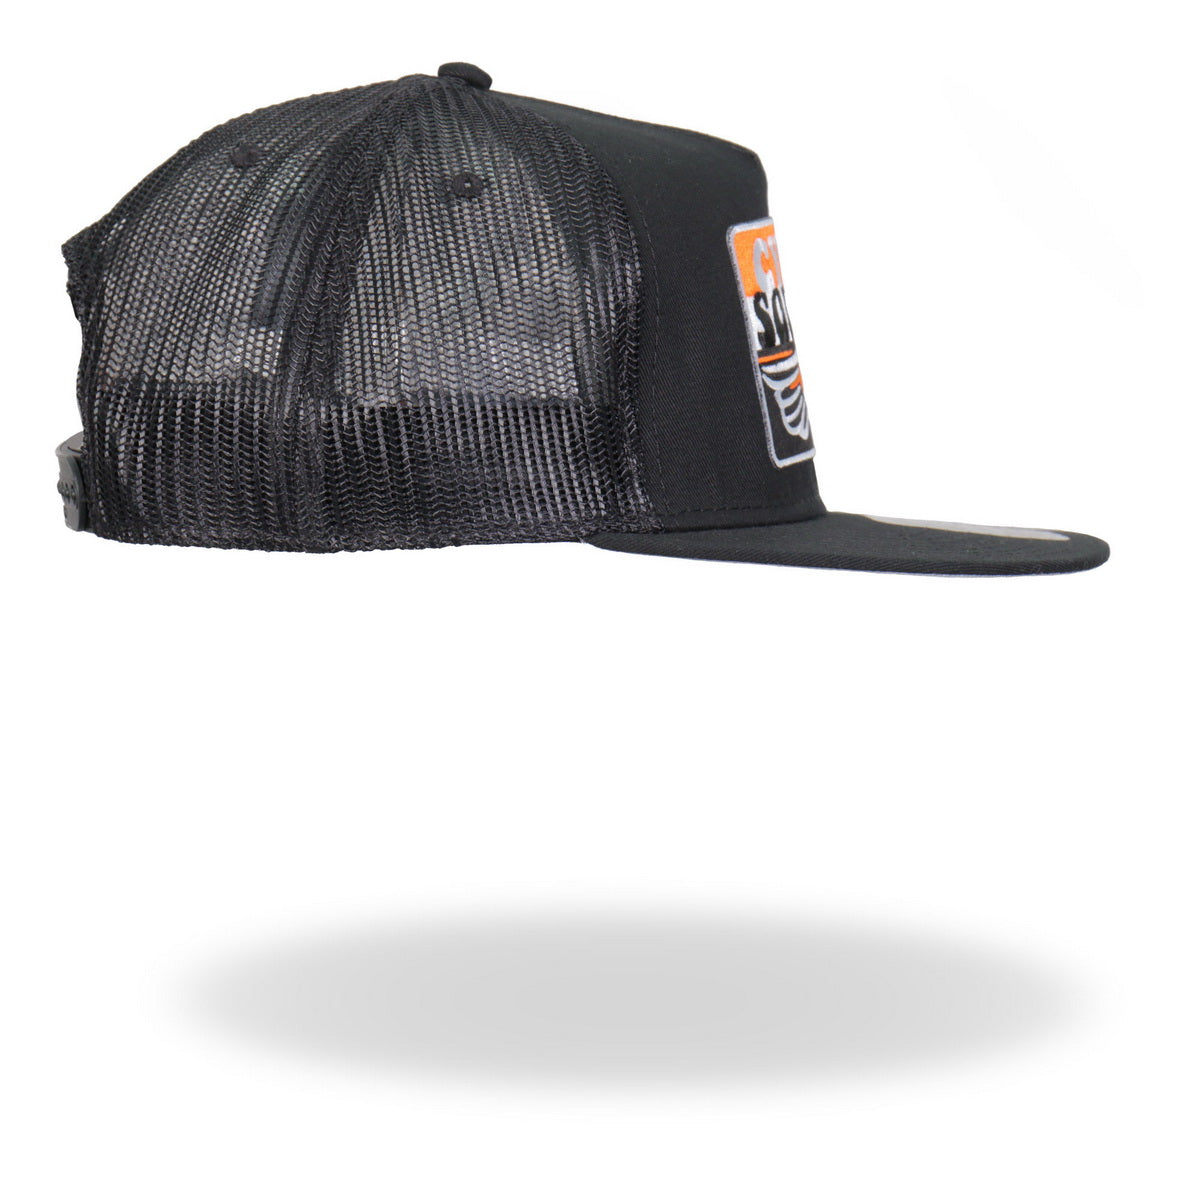 Hot Leathers CYA1004 Official Cycle Source Magazine Stripes Logo Snapback Hat